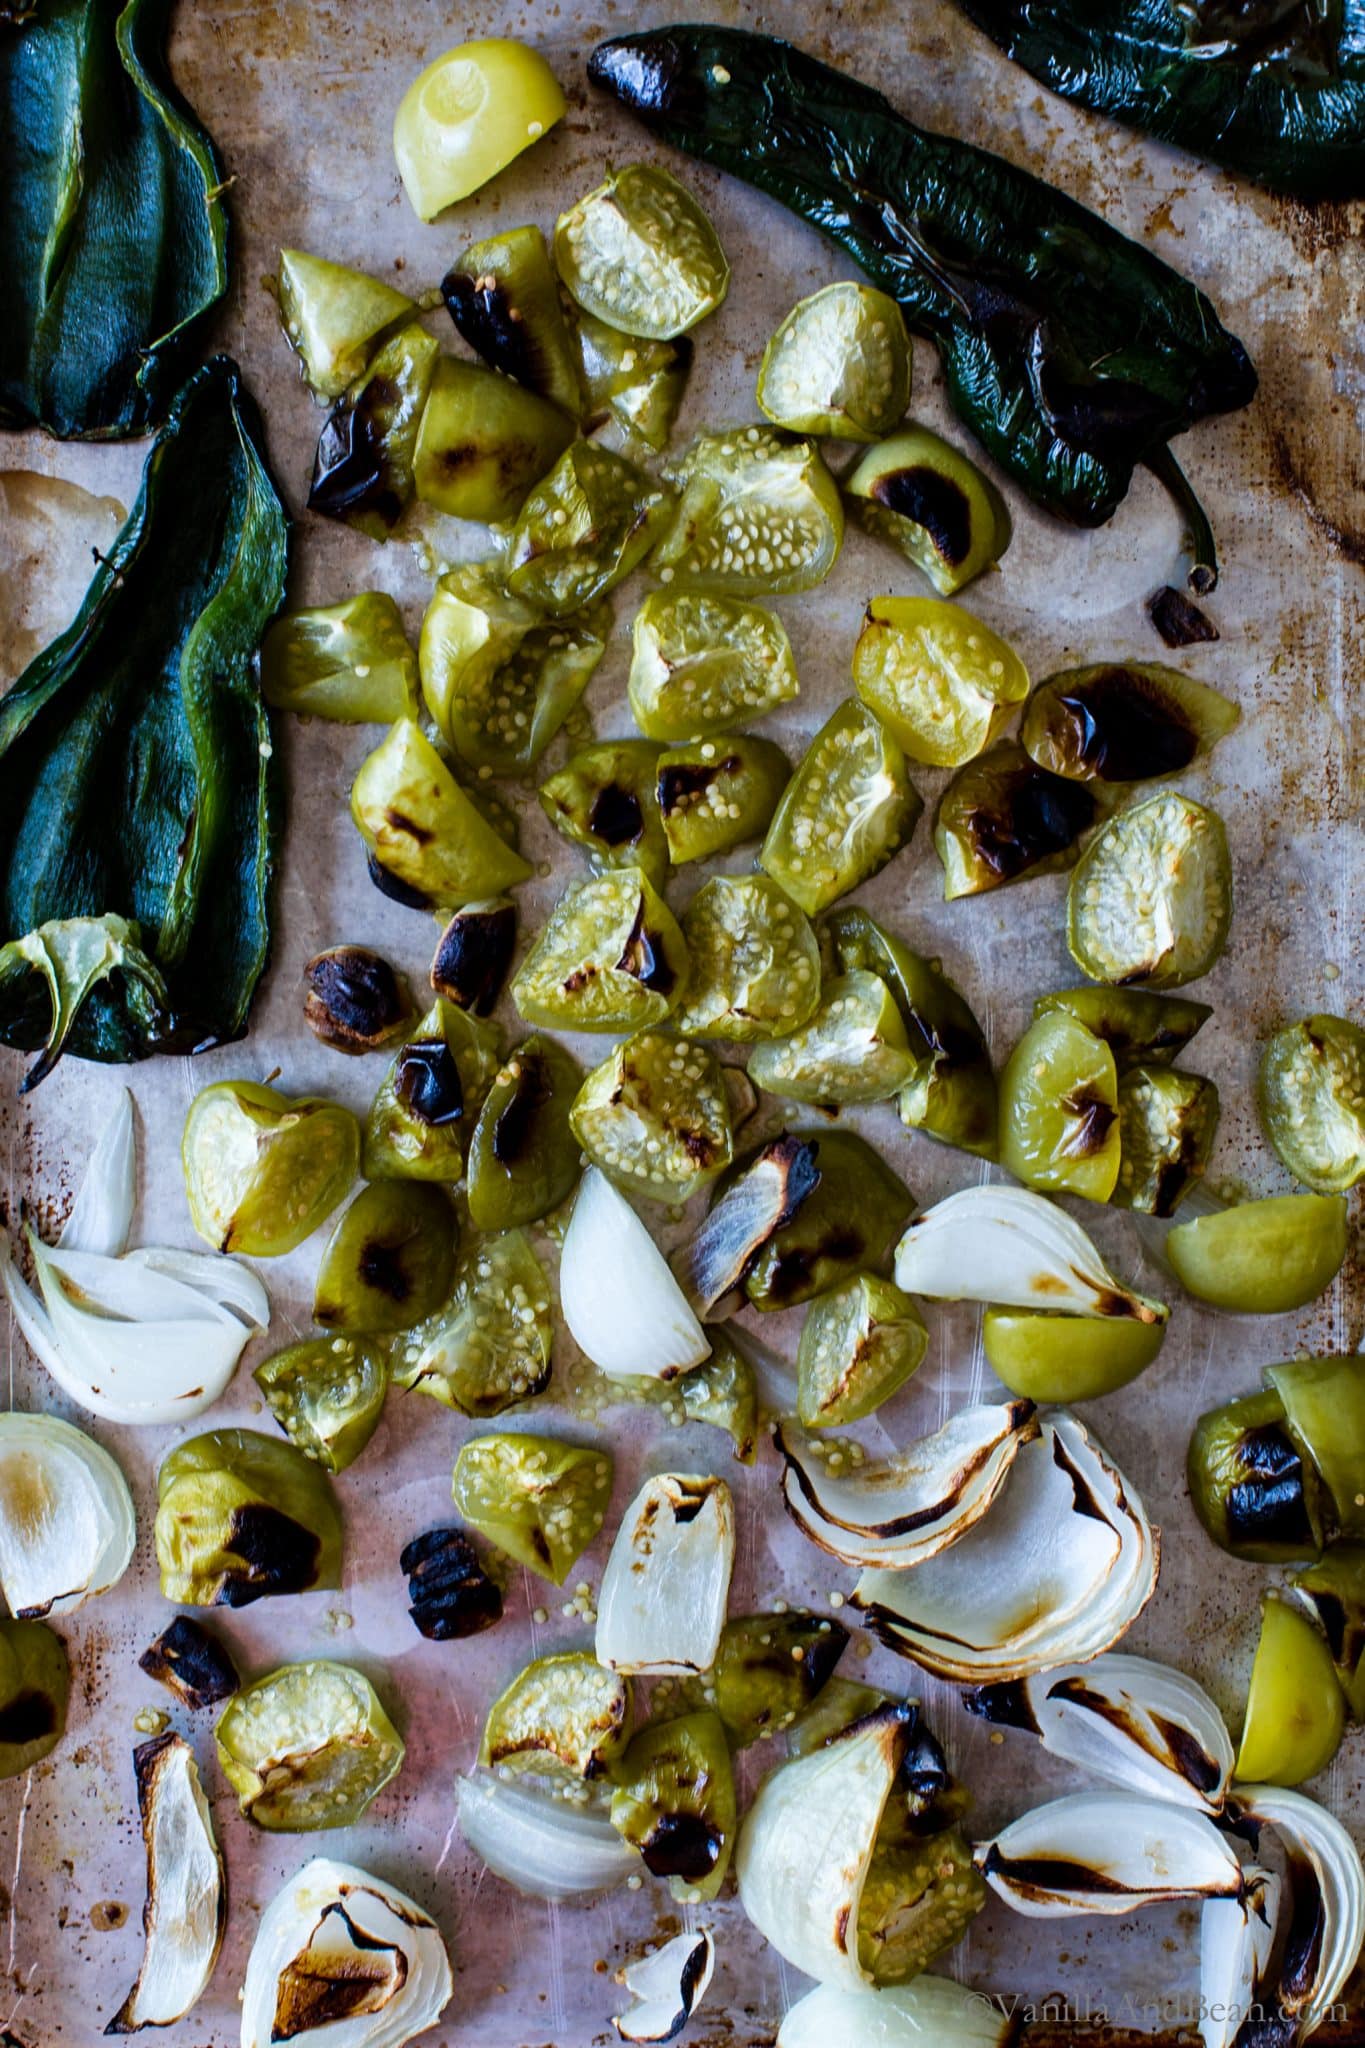 Roasted ingredients on a sheet pan for Roasted Tomatillo Salsa.